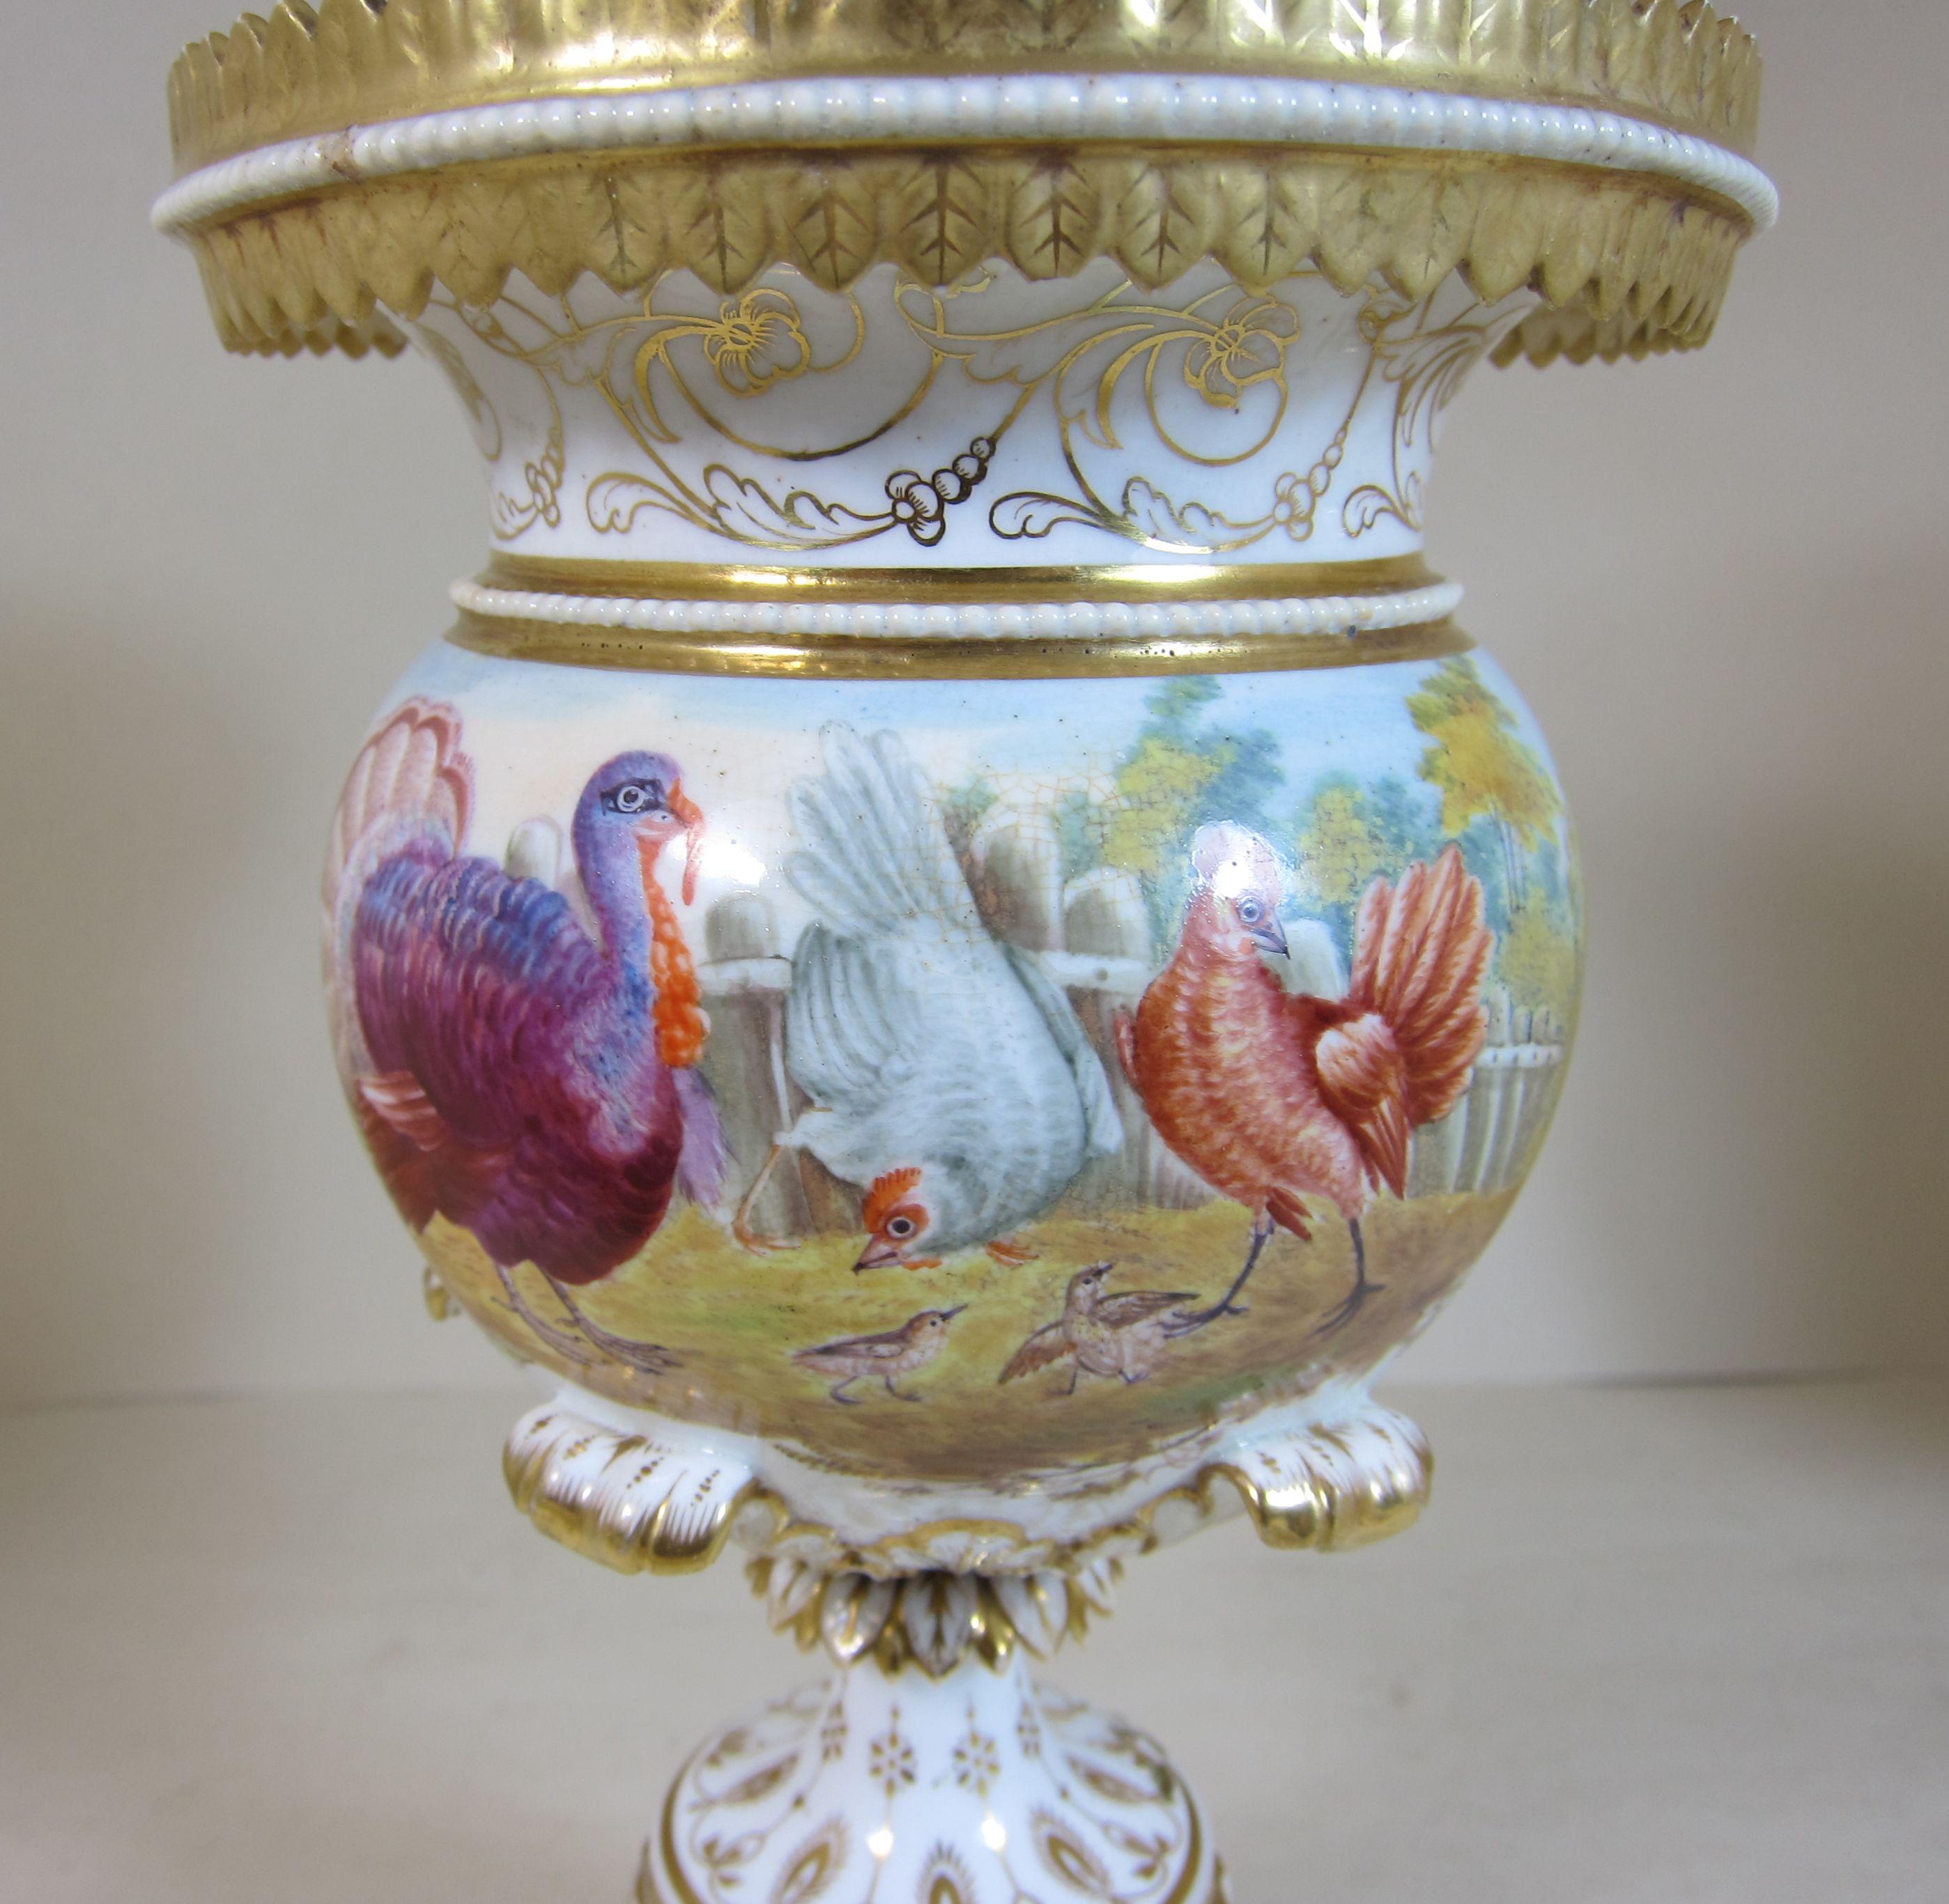 Pair of English 'Possibly Minton' Porcelain Hand-Painted Vases In Good Condition For Sale In London, GB